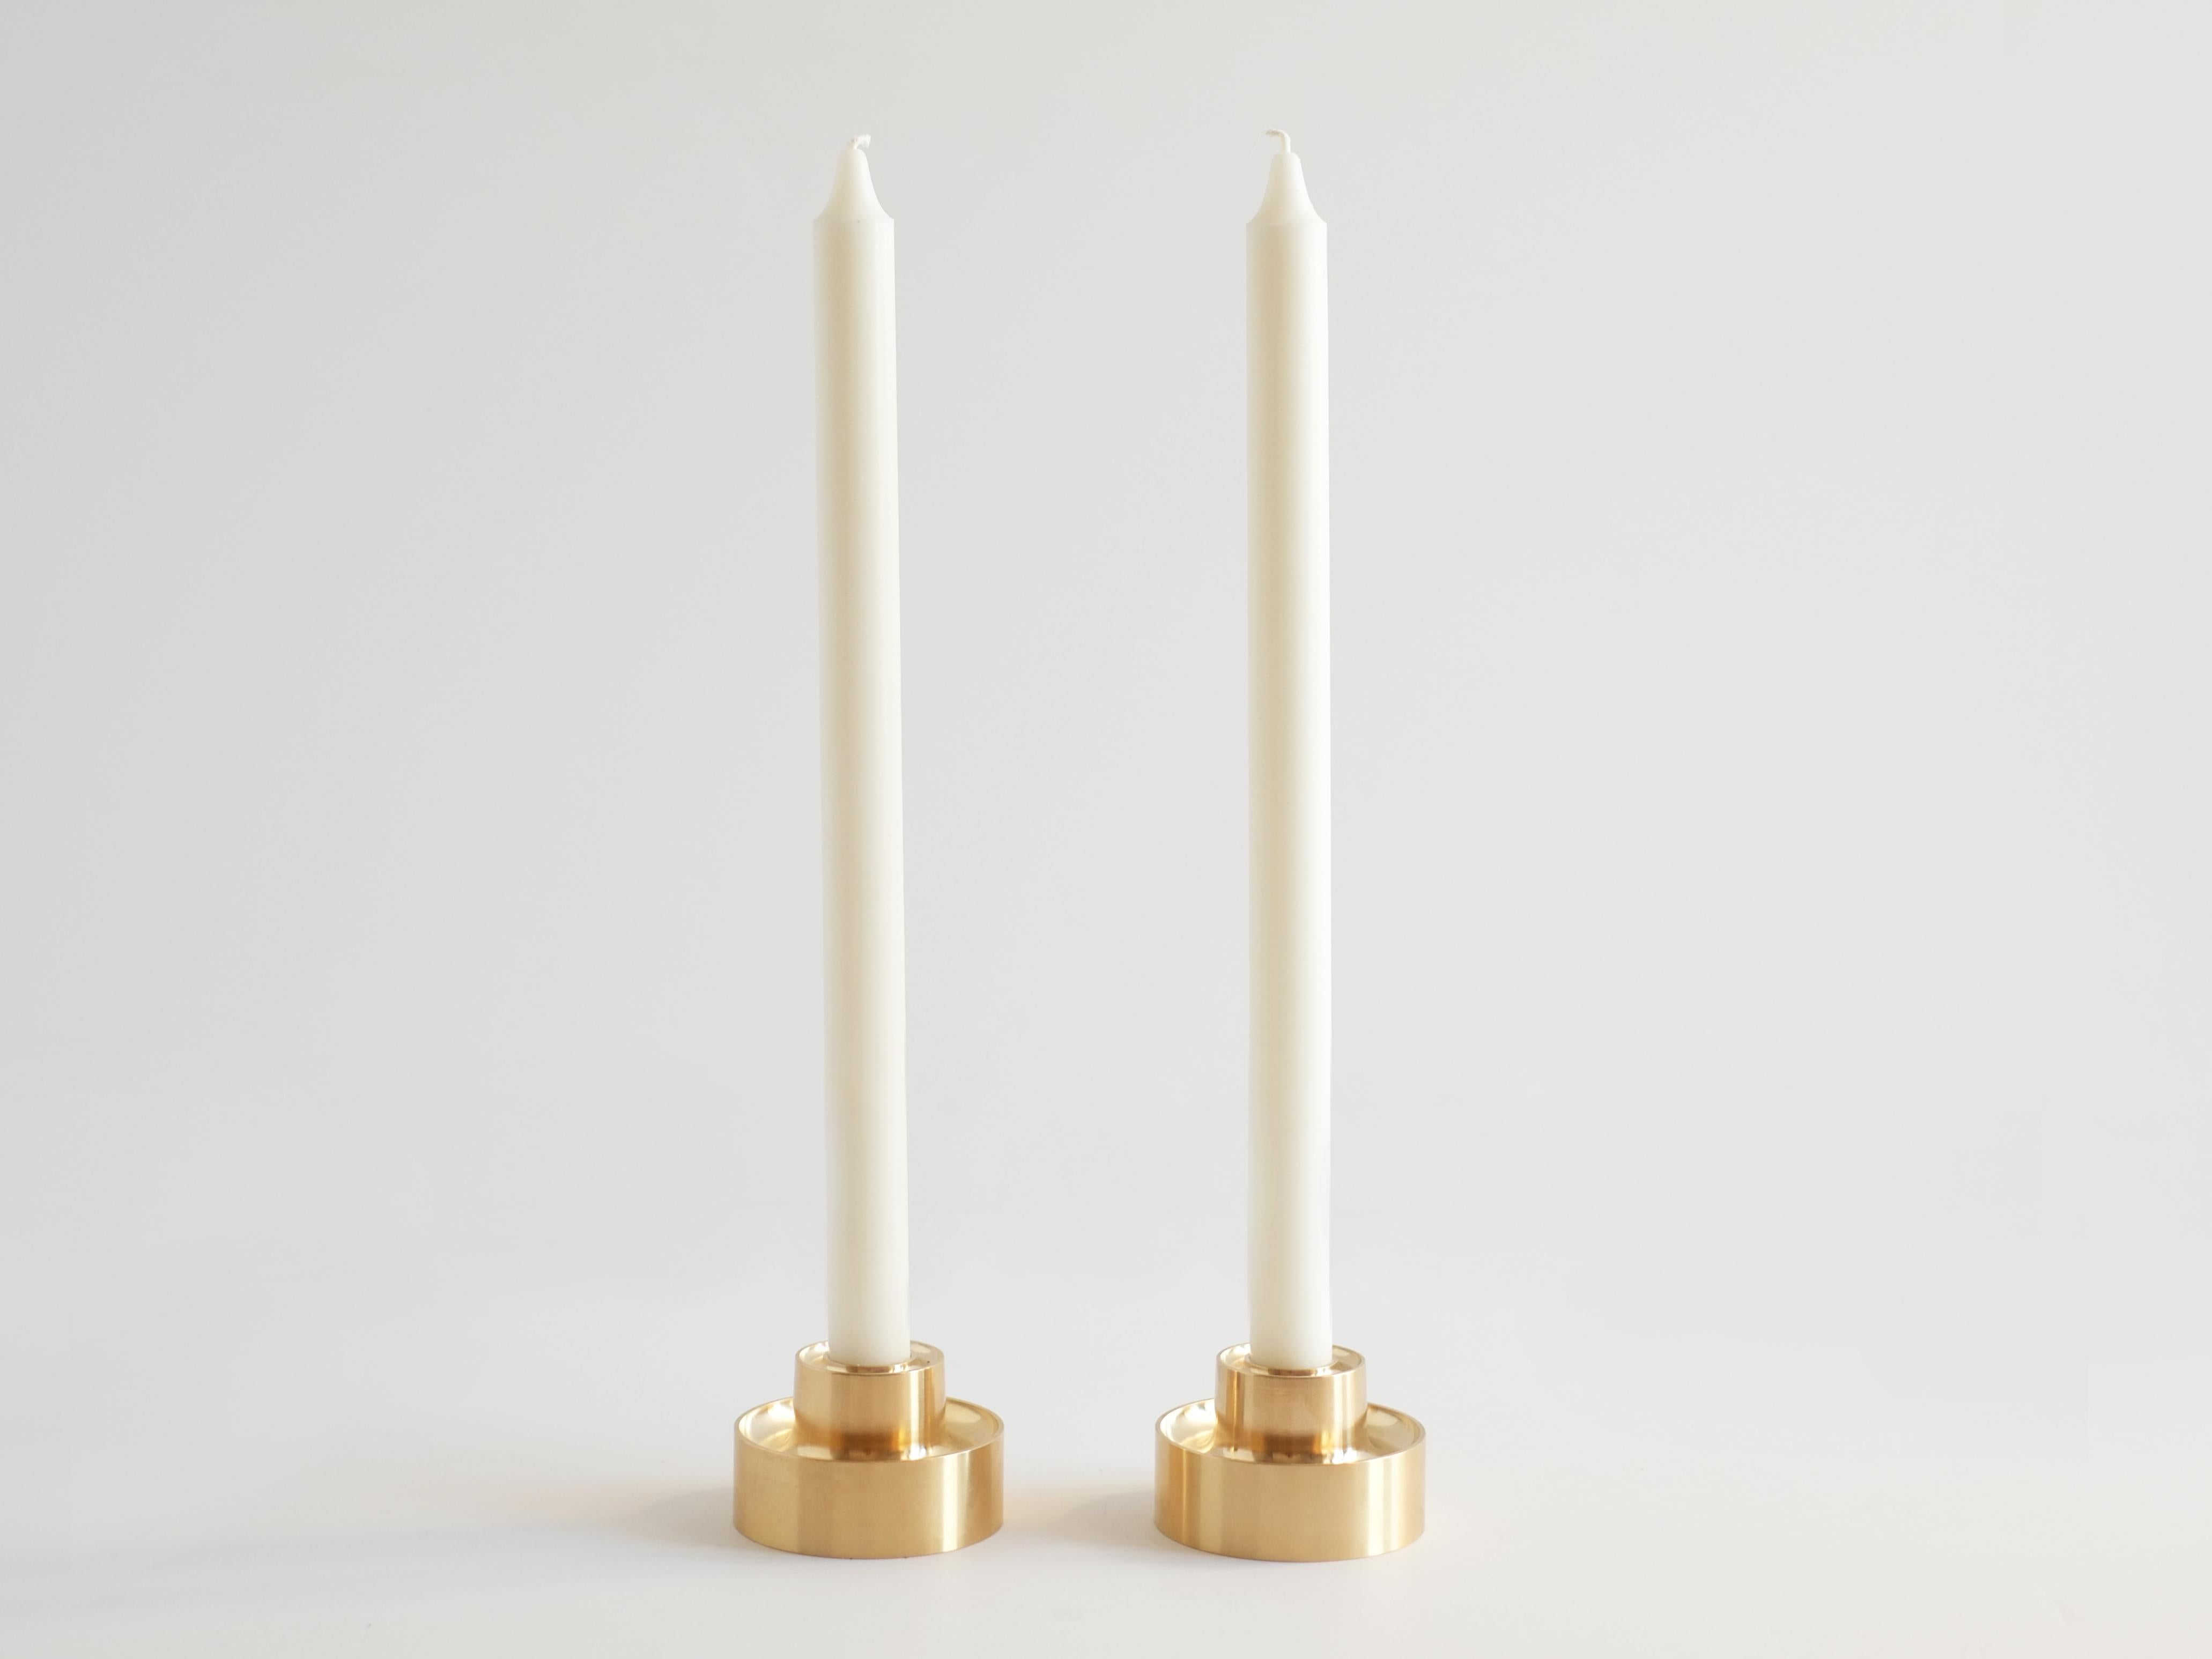 American Contemporary Brass Stacking Candle Holders by Fort Standard, in Stock